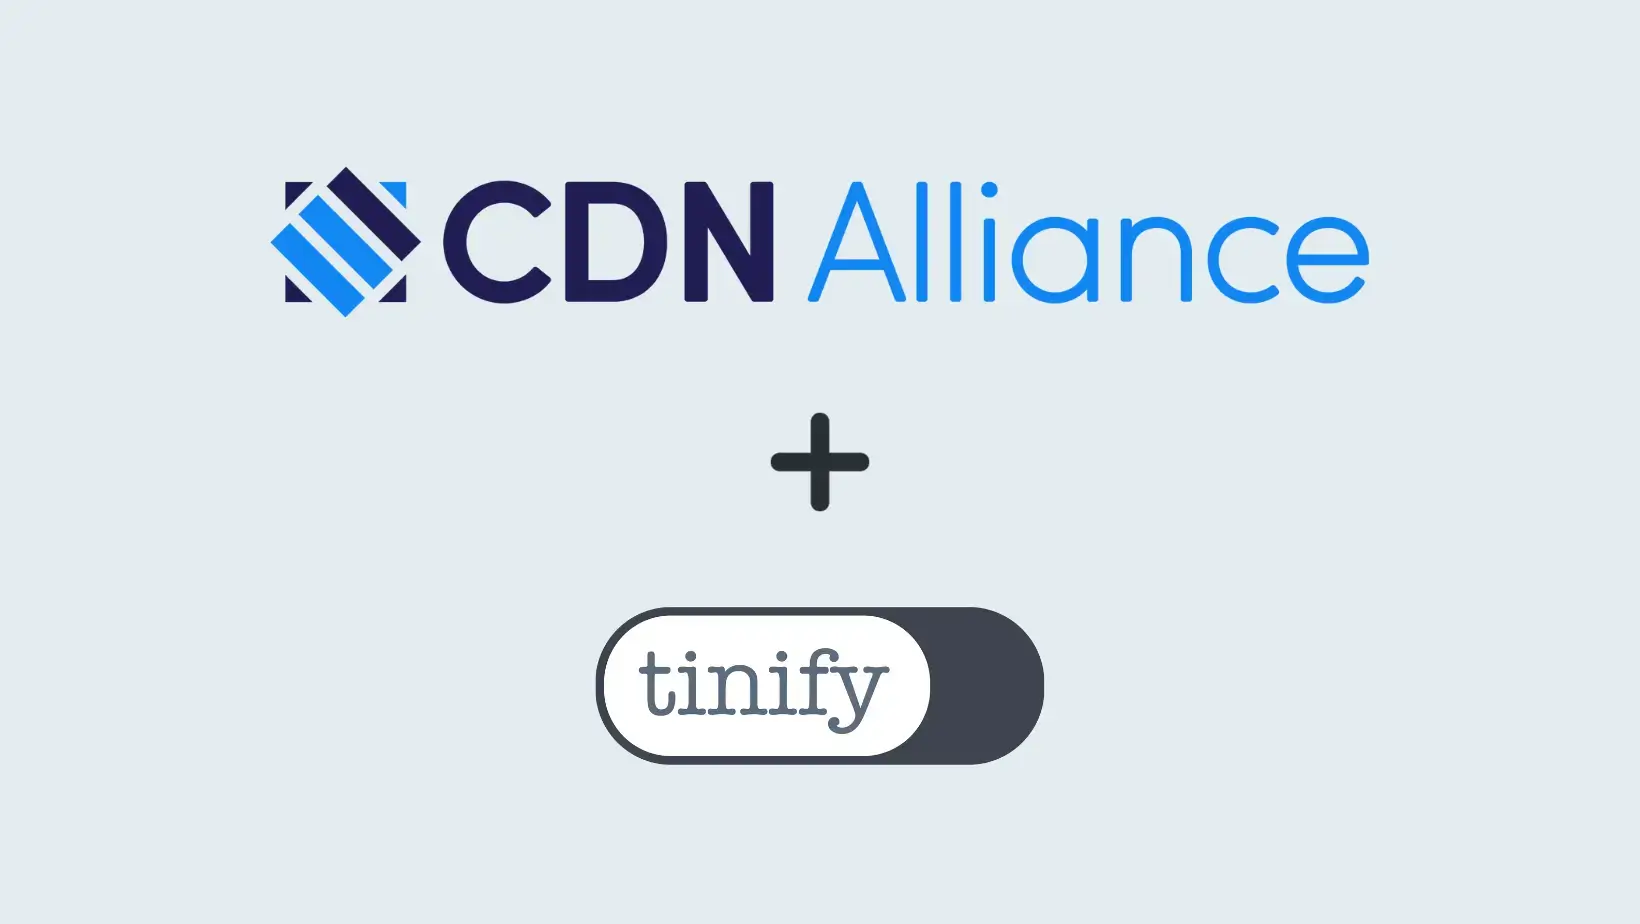 Tinify joins CDN Alliance and strengthens its position in the CDN industry